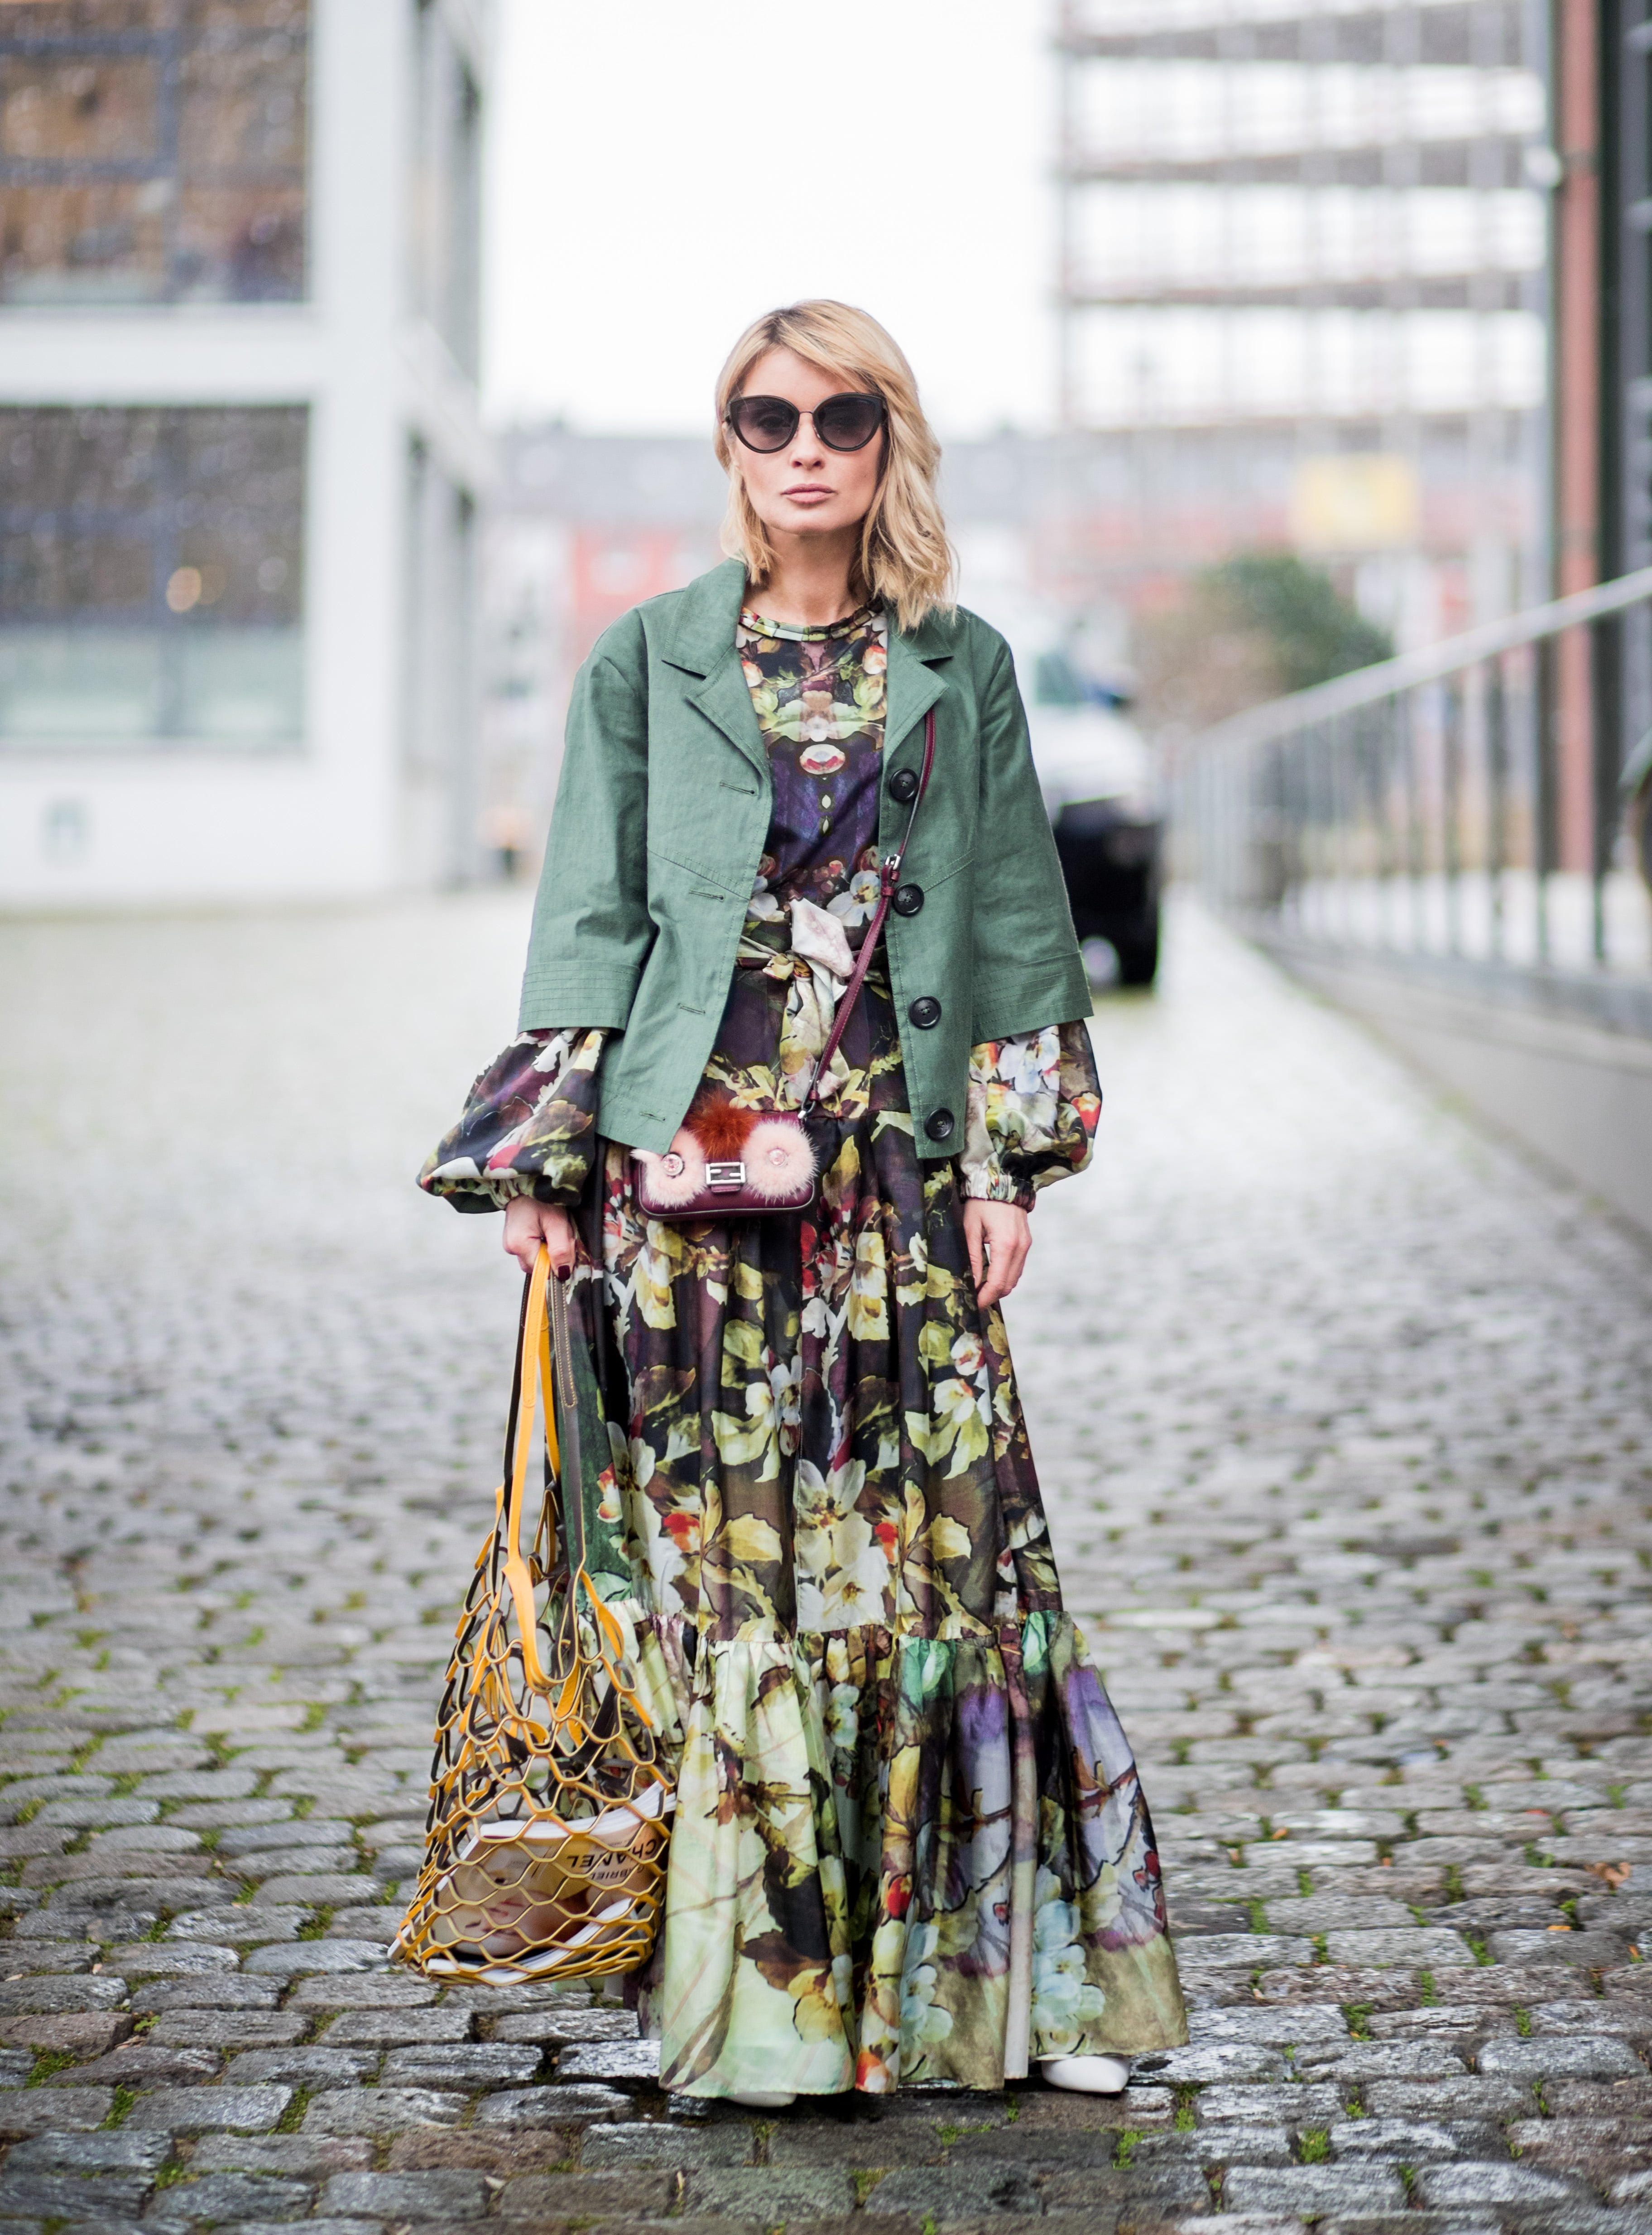 Green Maxi Dress Outfits (6 ideas & outfits)